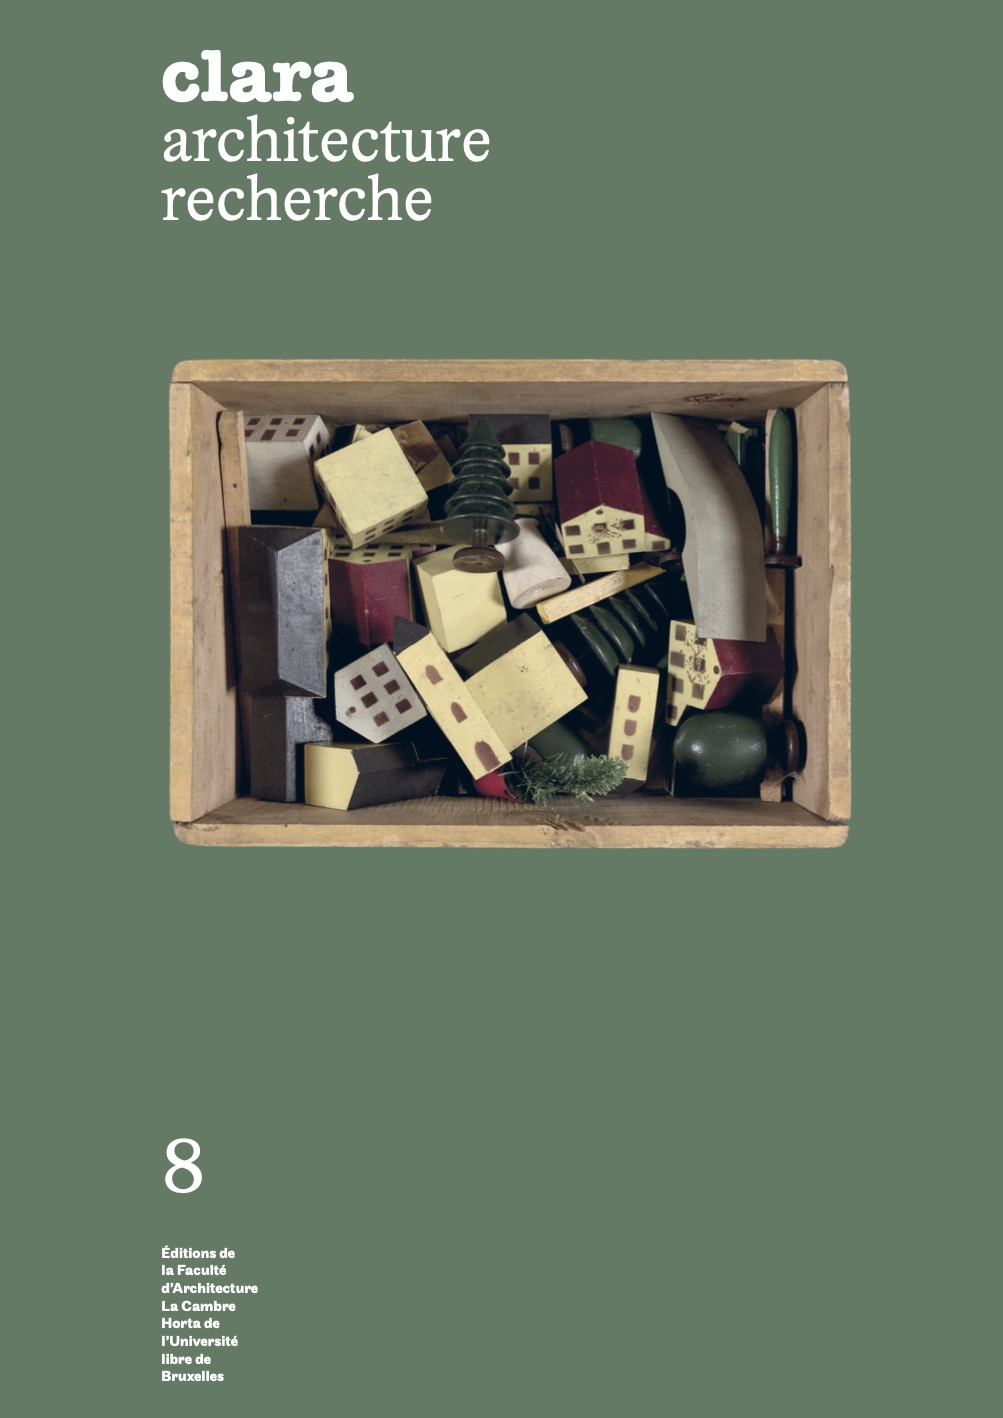 Cover of Clara no 8 featuring toys set in wooden box aimed at the construction of a village